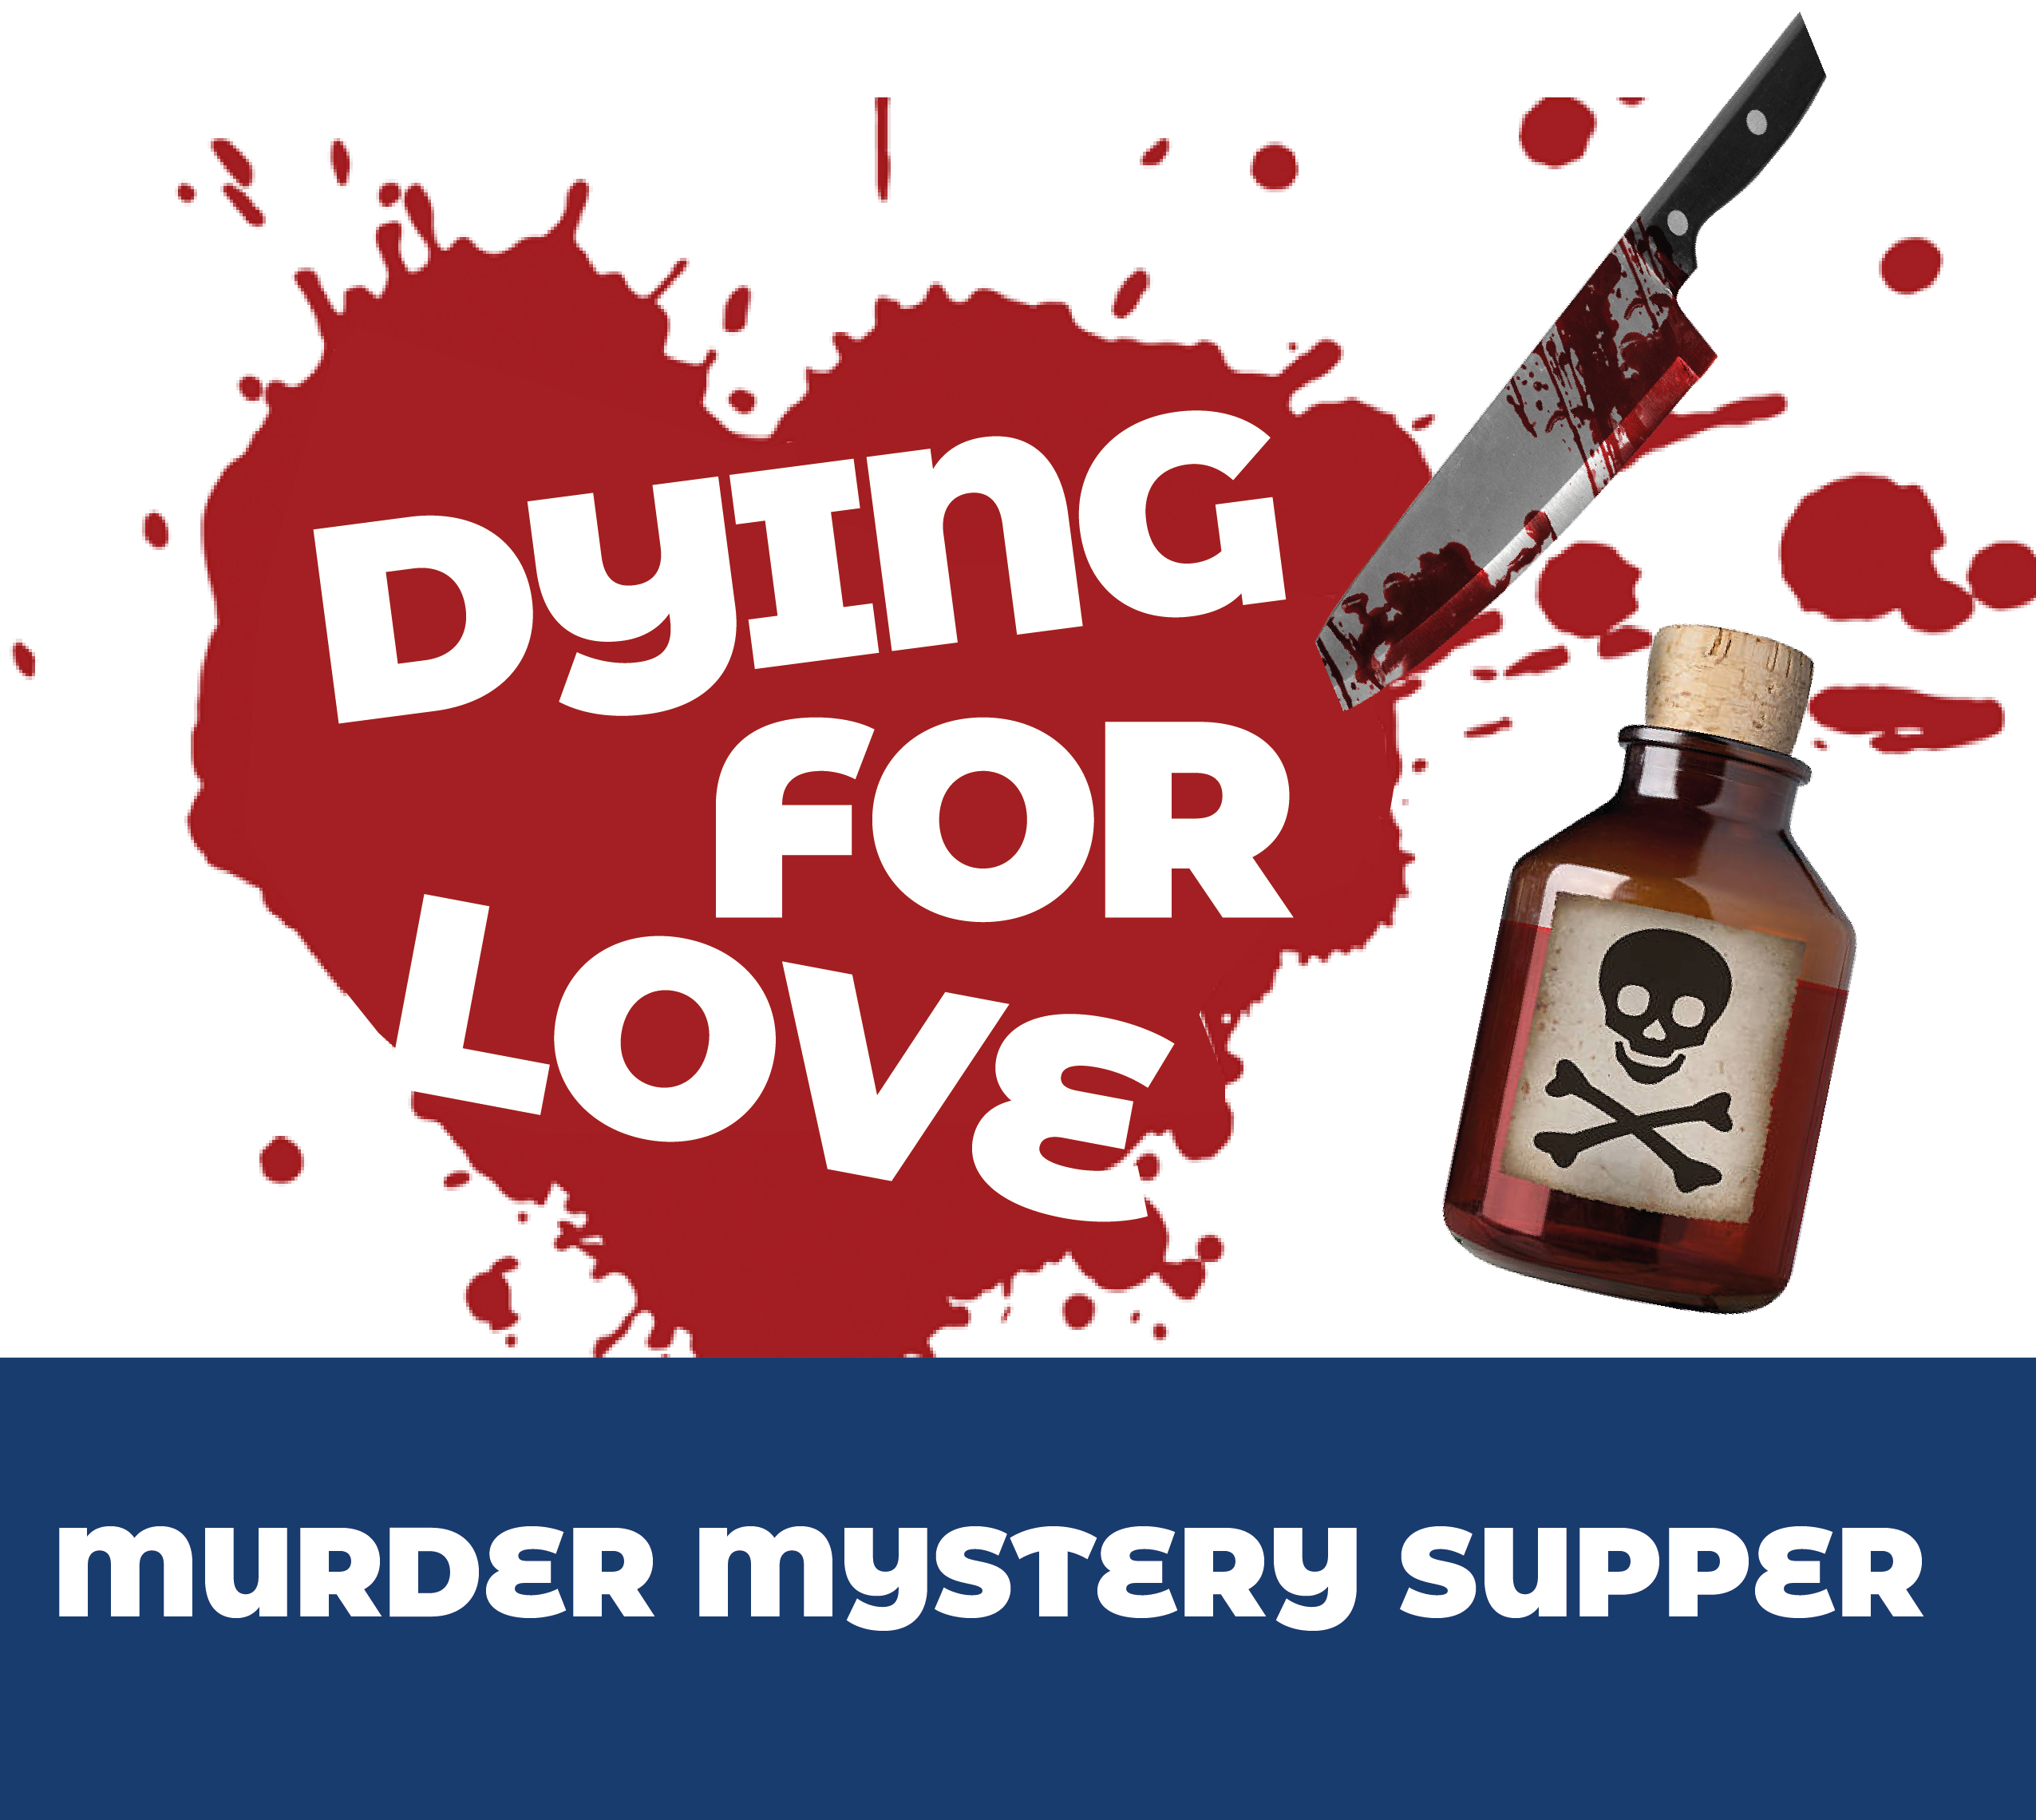 Murder Mystery Supper: Dying For Love (£28pp)